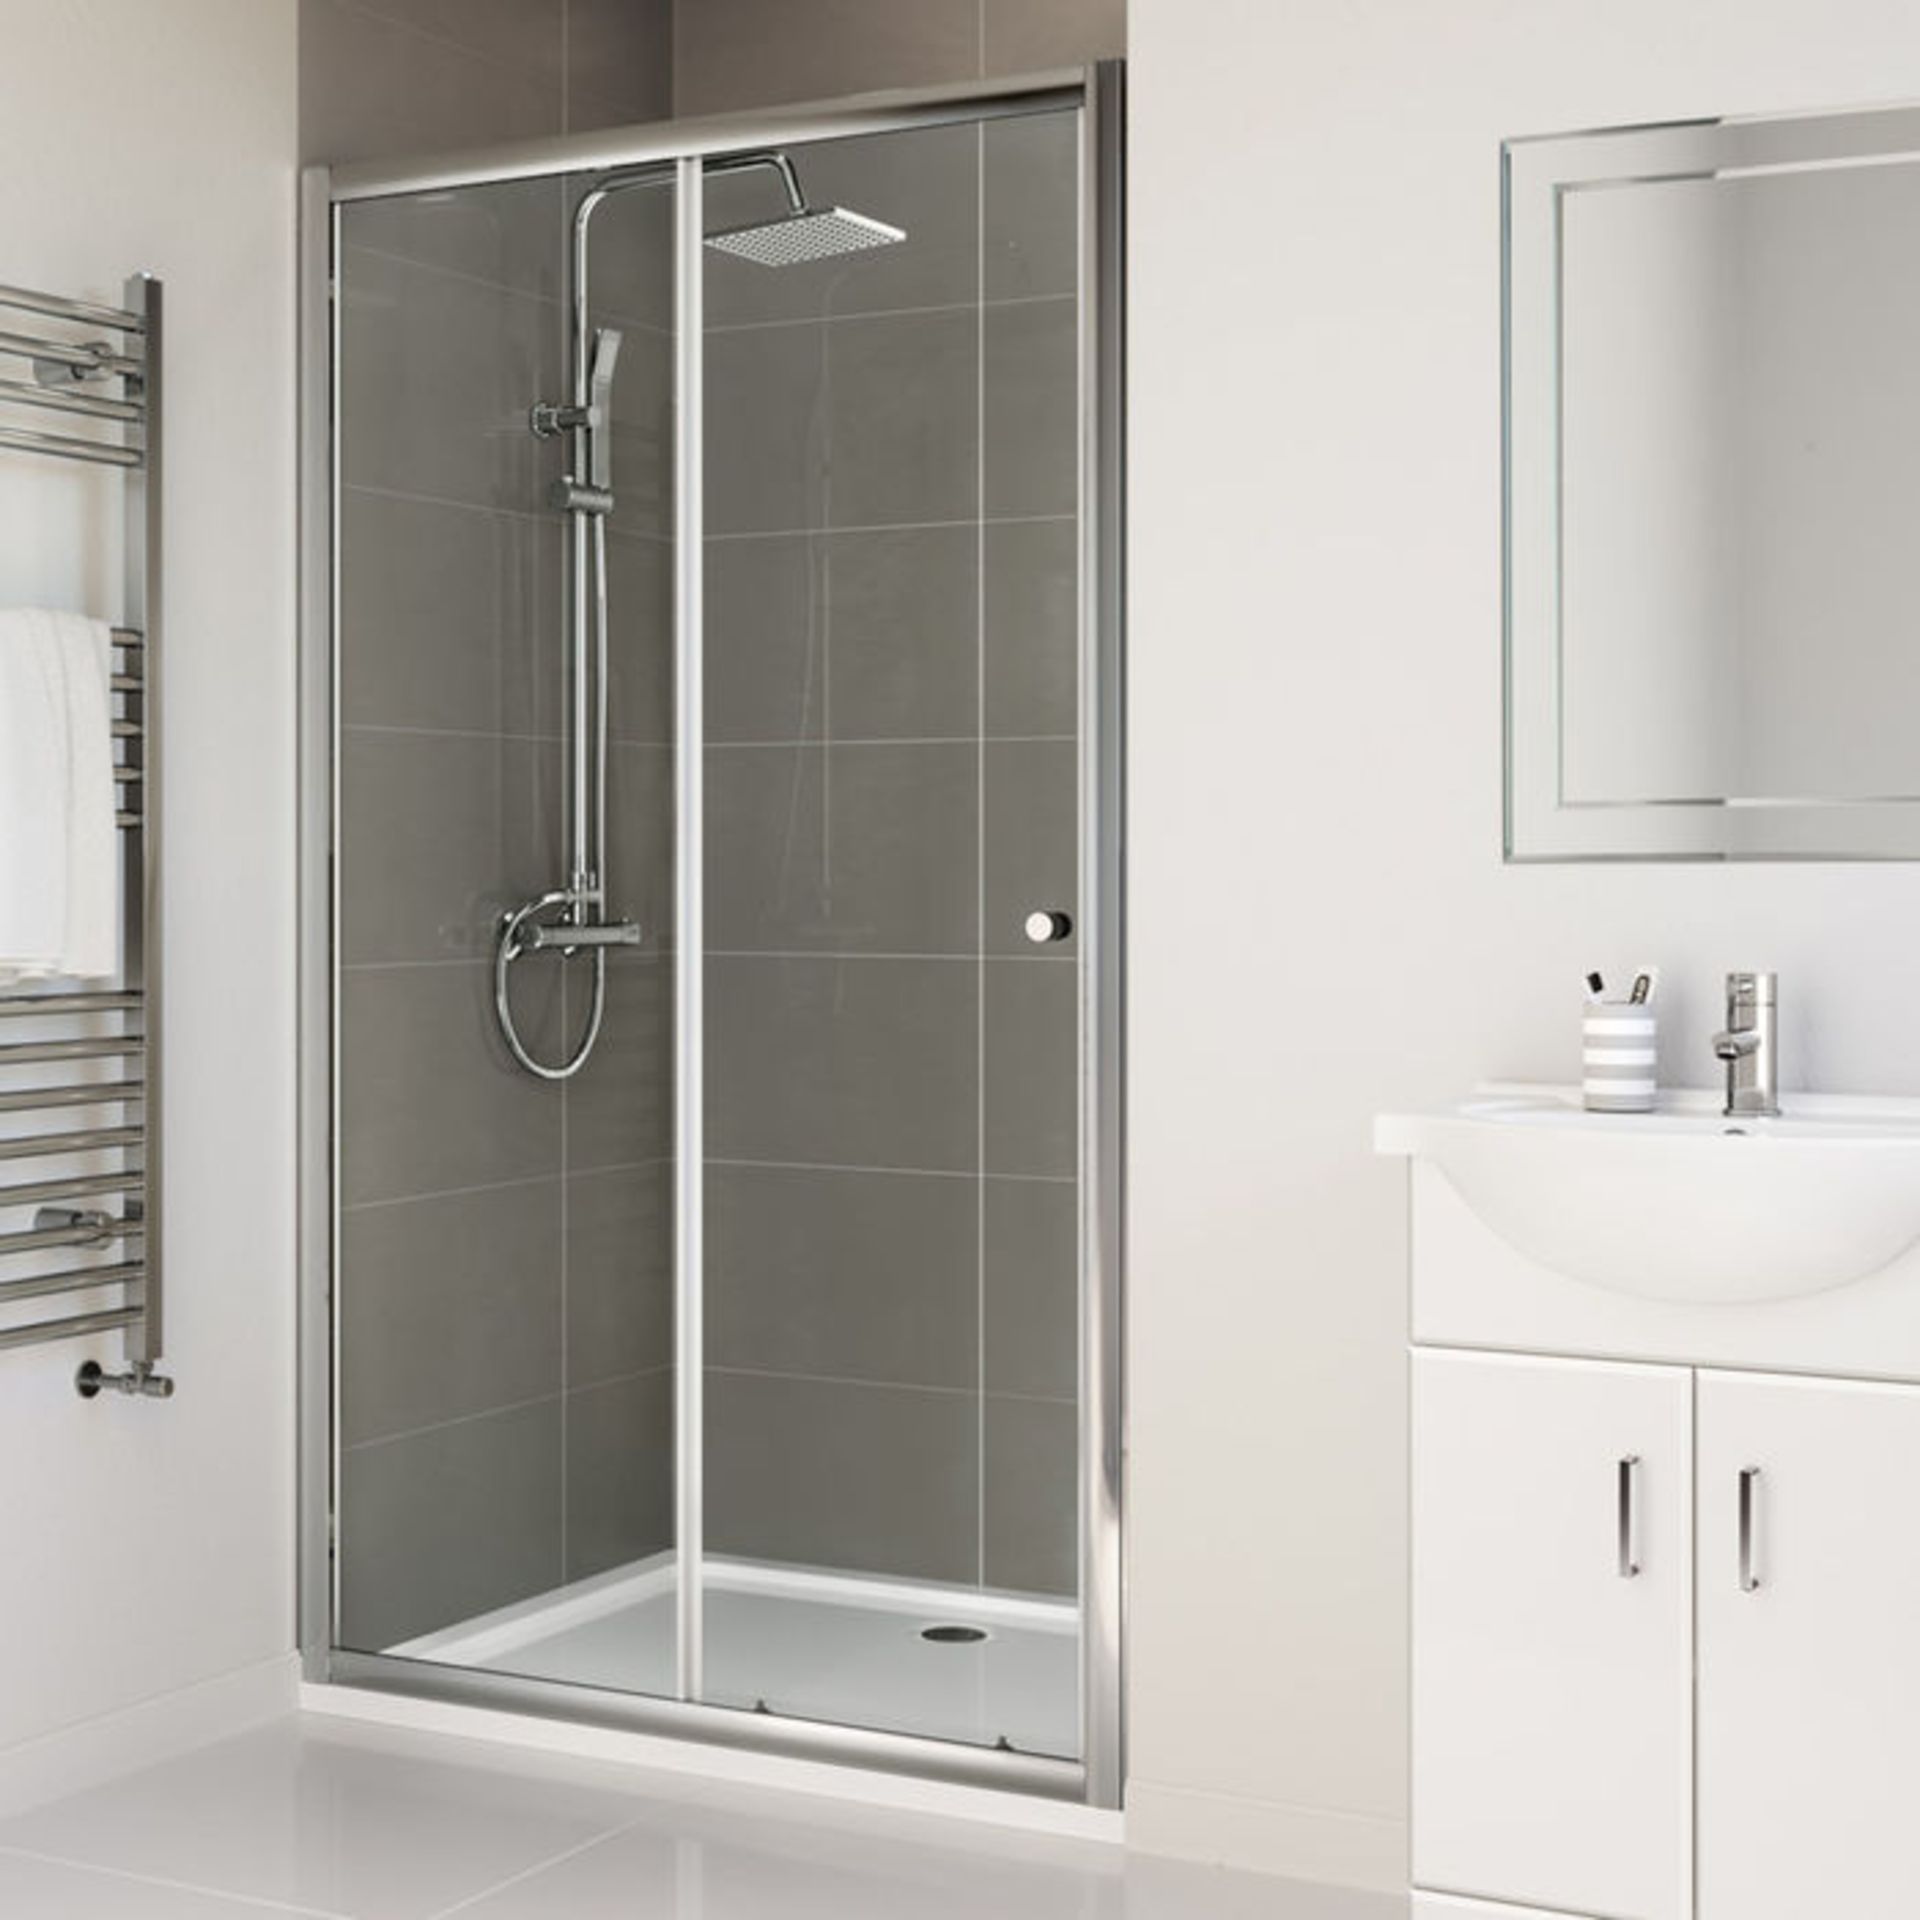 (W98) 1200mm - Elements Sliding Shower Door. RRP £299.99. 4mm Safety Glass Fully waterproof tested